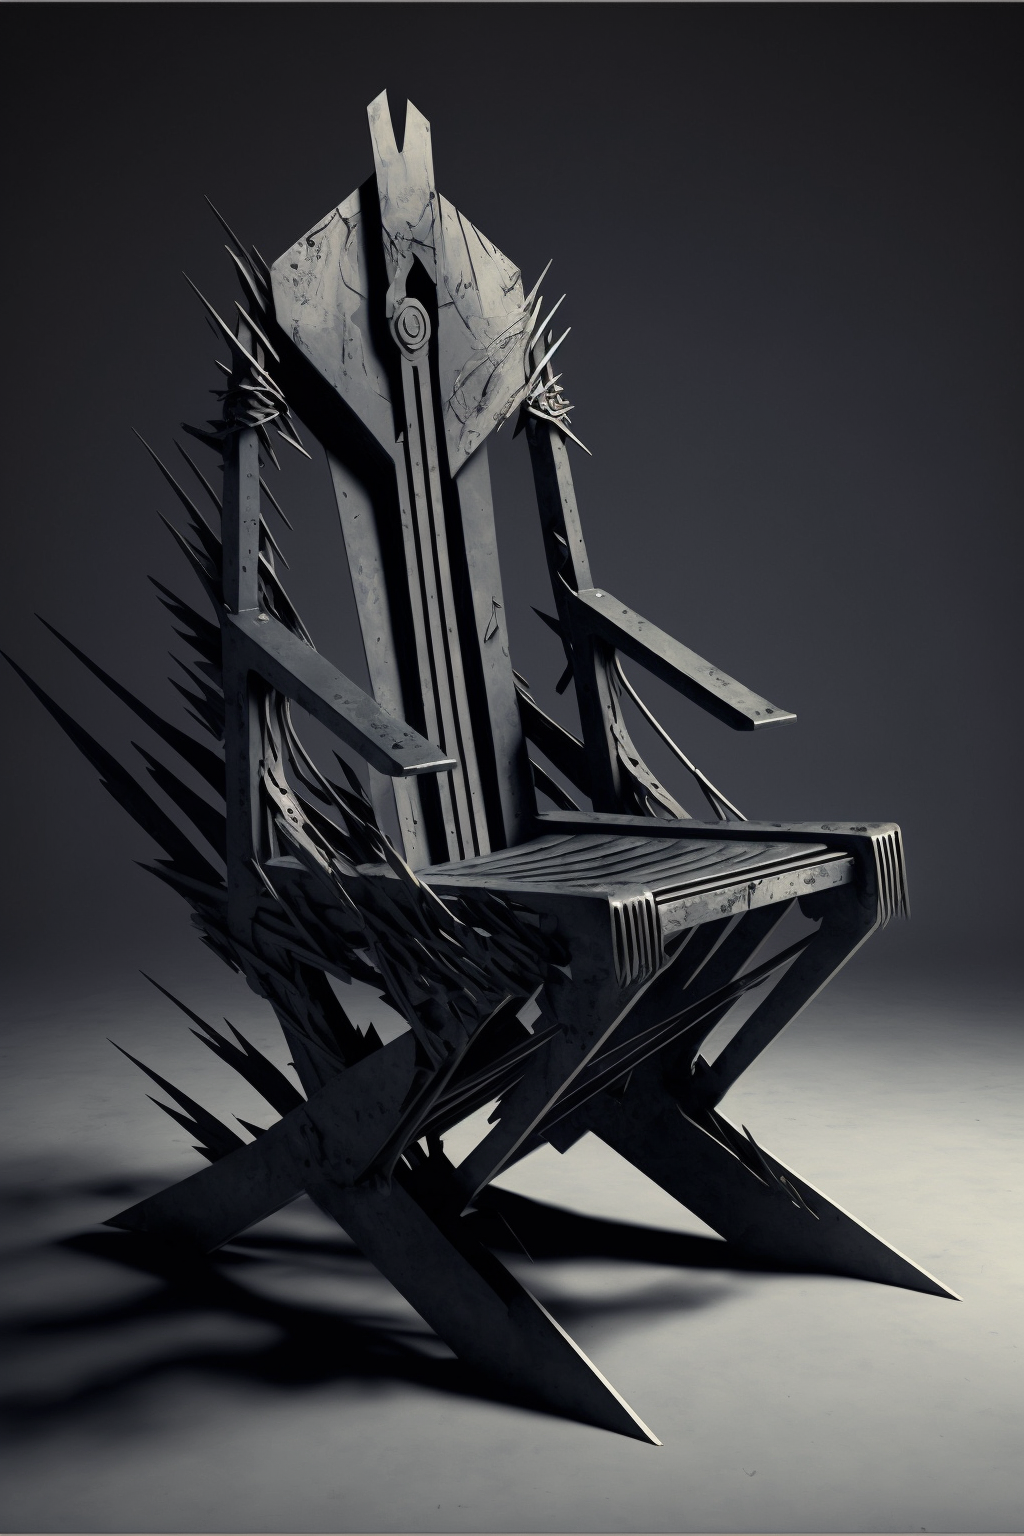 Chair in the style of Dystopian Blade Runnerism 2